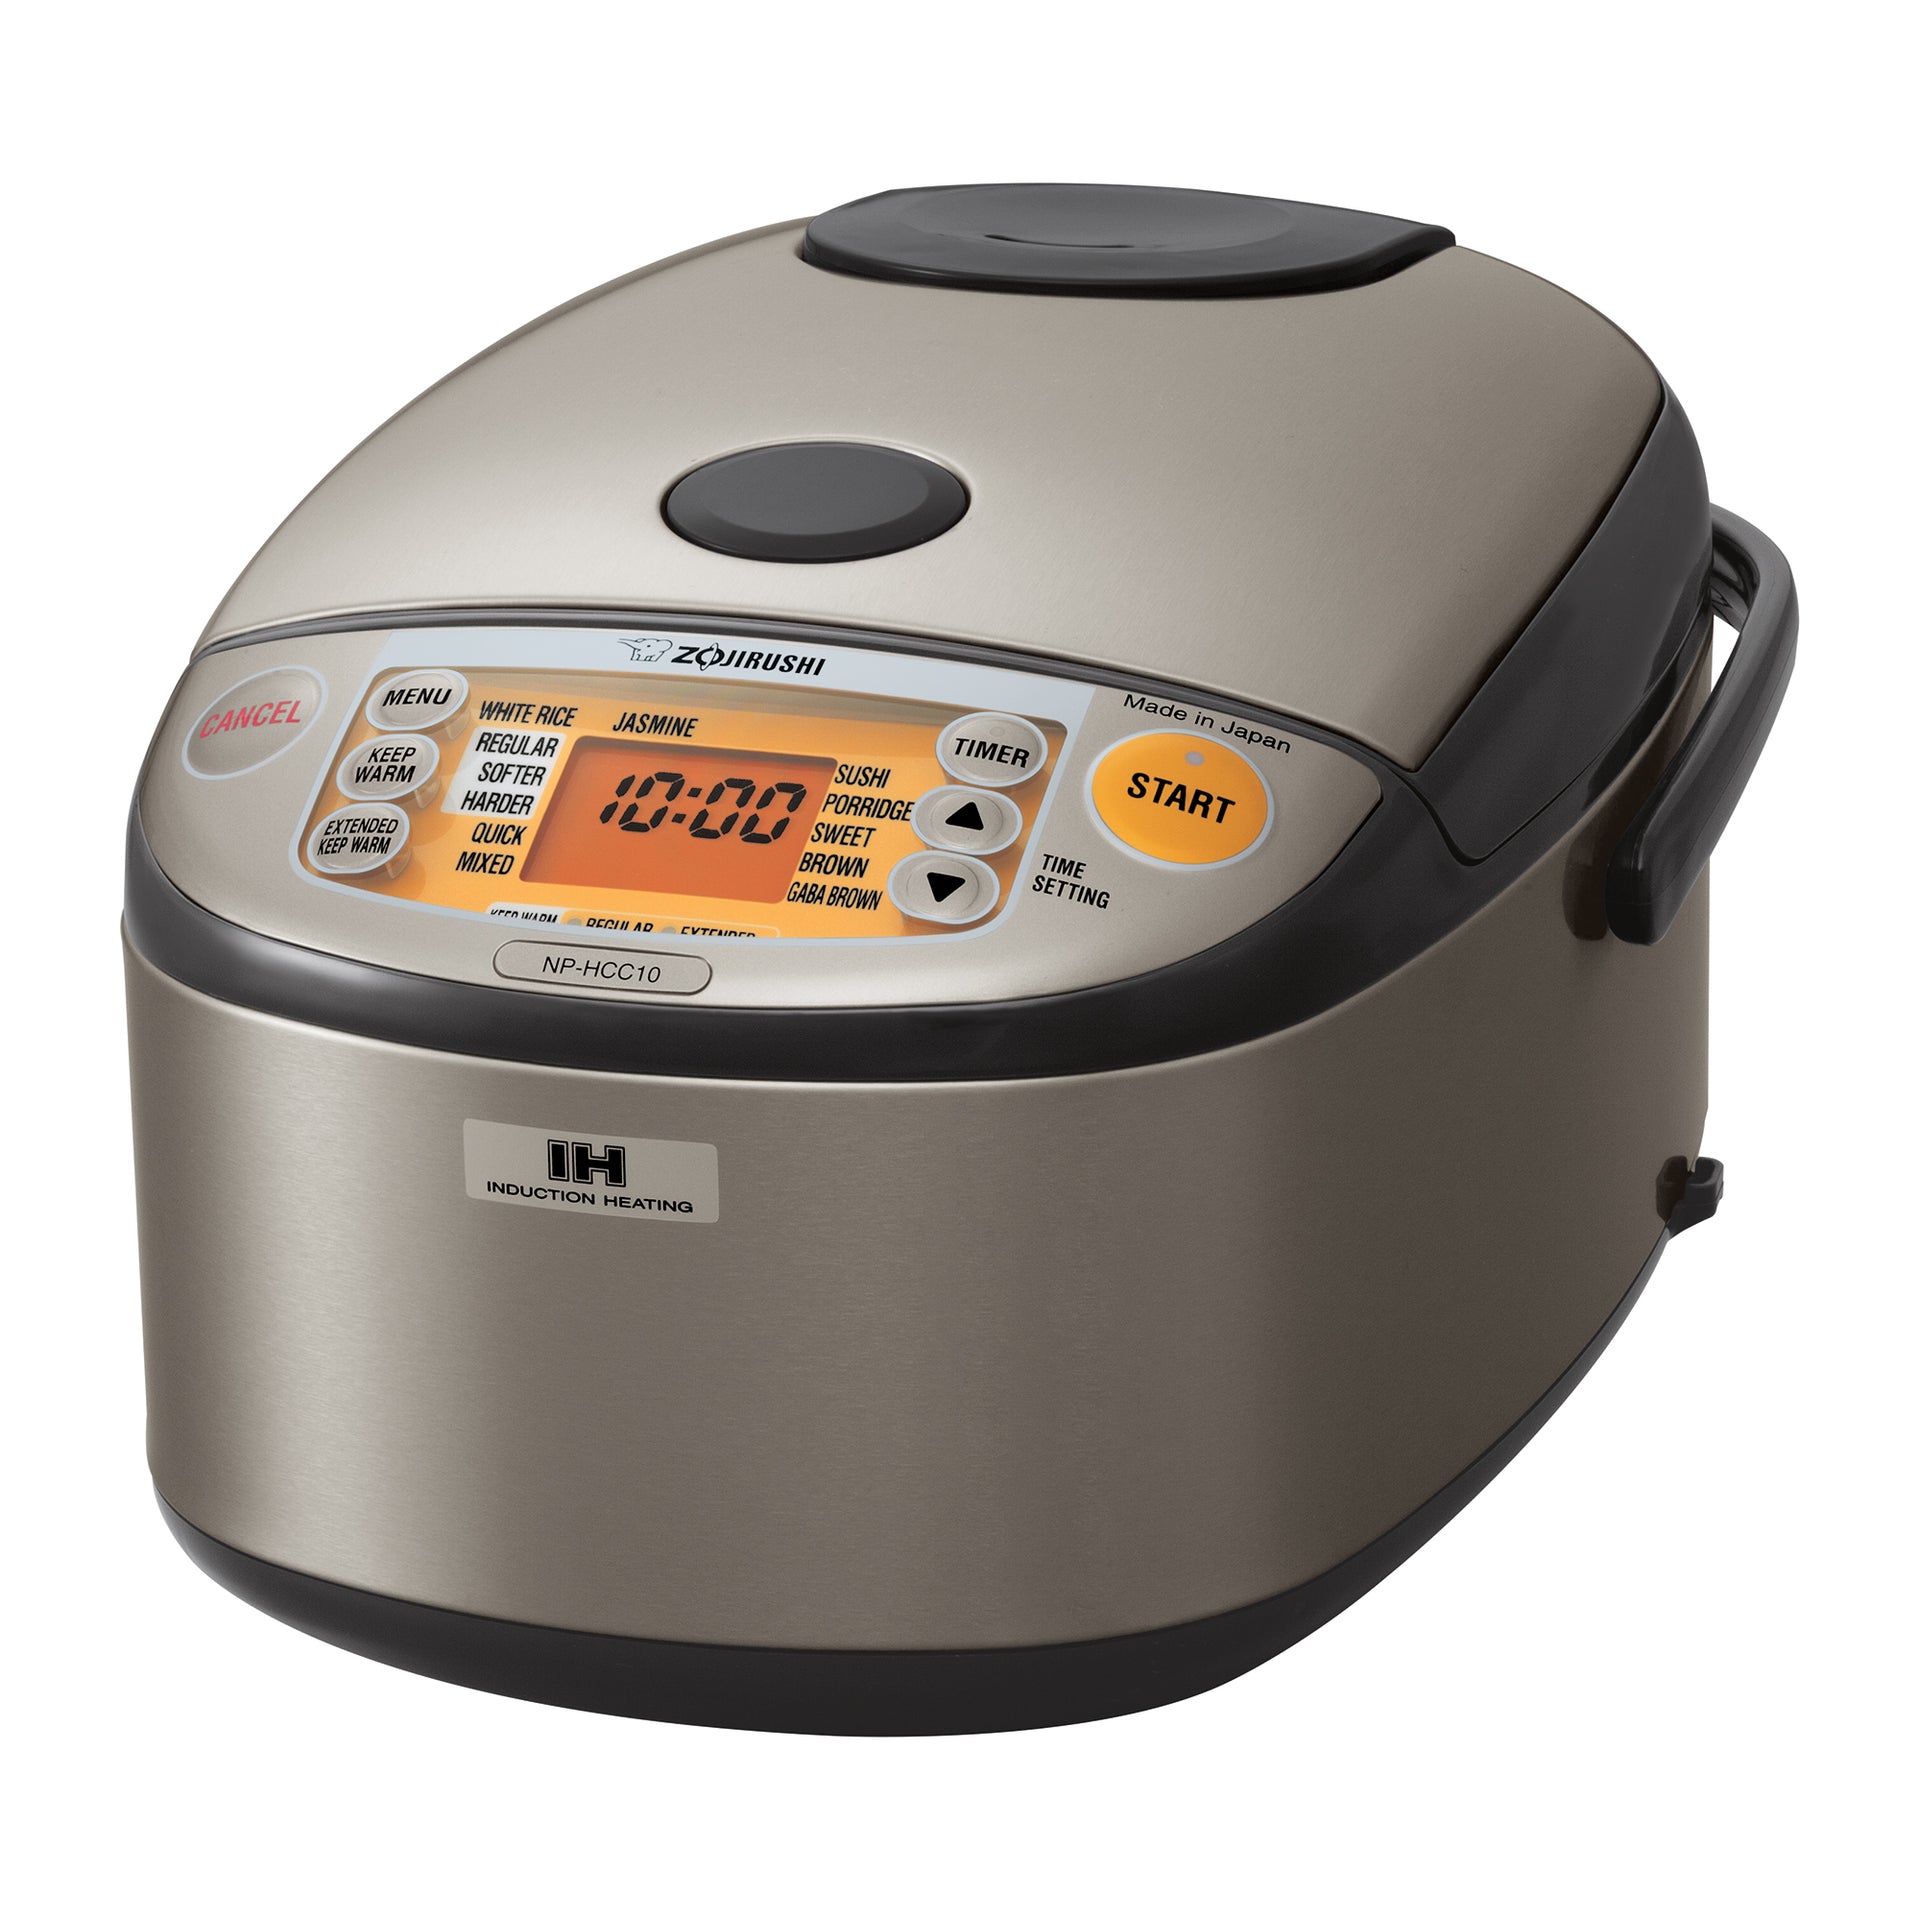 Zojirushi 10-cup Automatic Rice Cooker and Warmer - Bed Bath & Beyond -  13867210